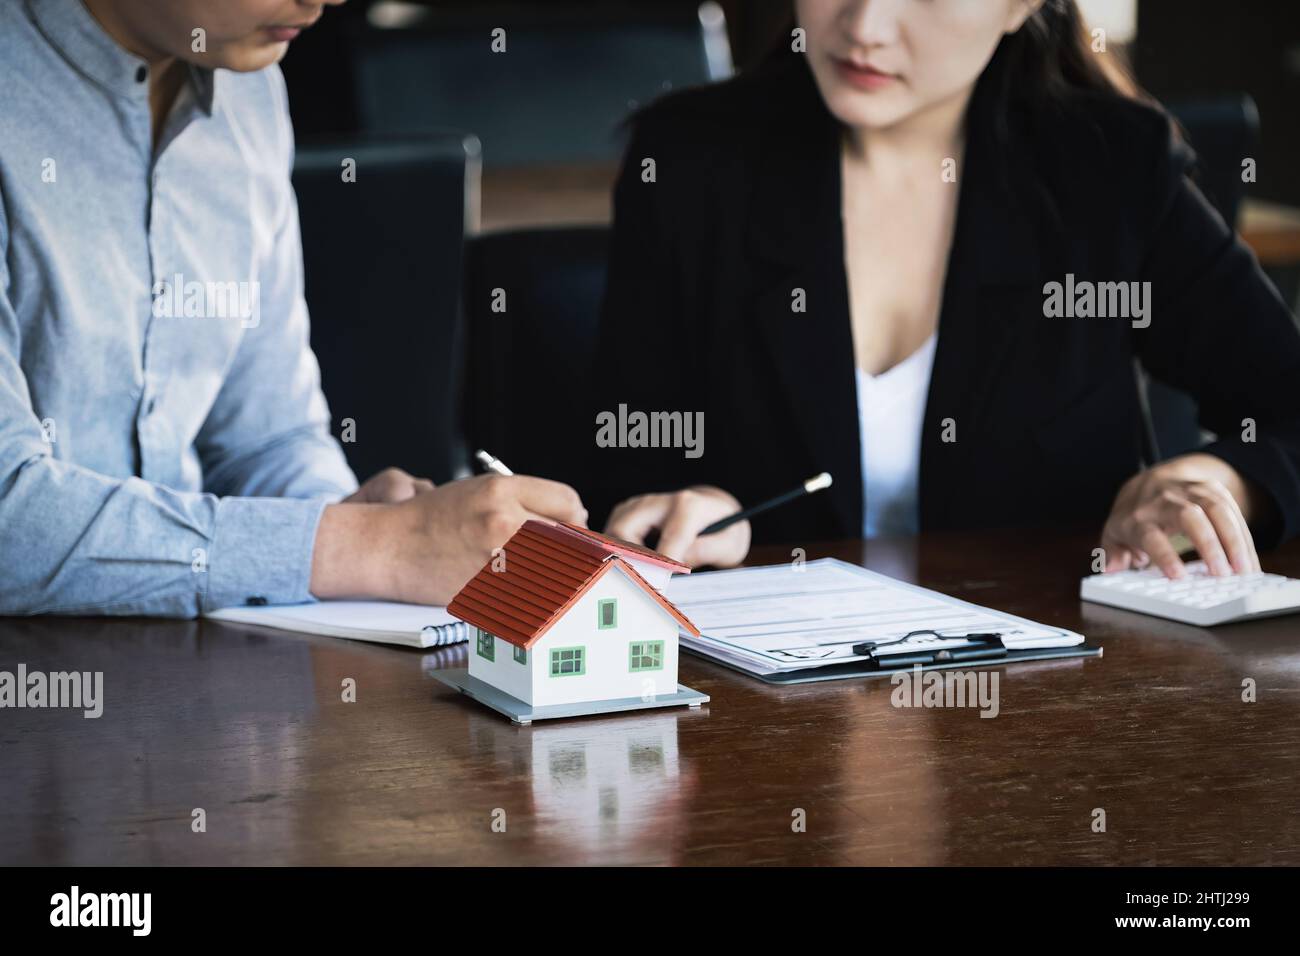 Concept of signing loan agreements, refinancing, buying and selling houses and land, focusing on model houses. A real estate agent is pointing to Stock Photo